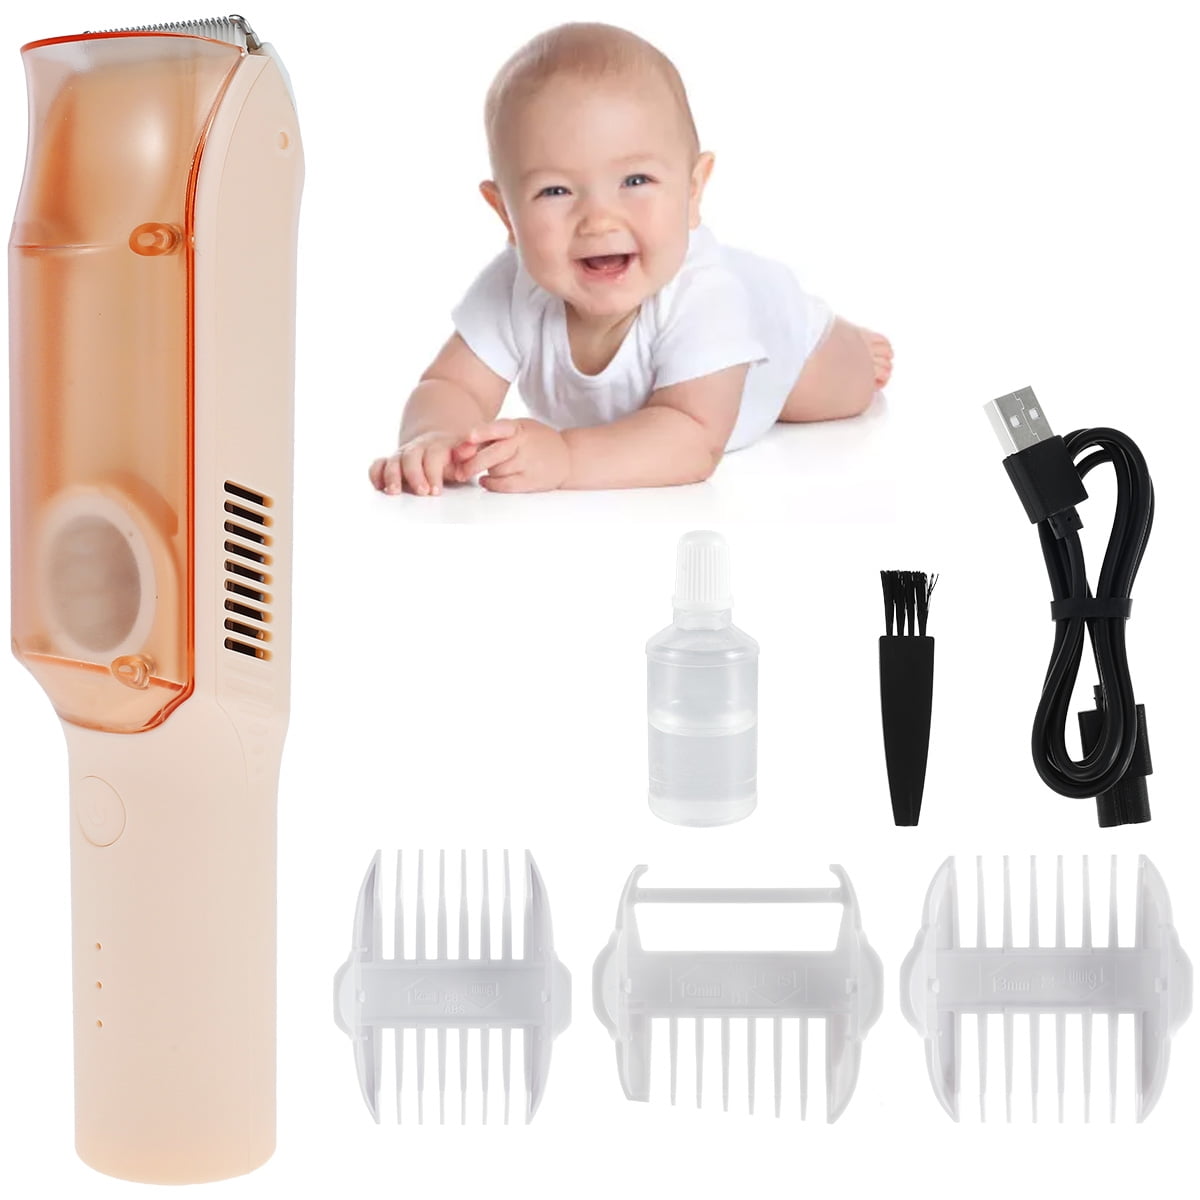 GOTYDI Baby Hair Clipper with 3 Length Calipers Cordless & Waterproof Hair  Trimmer with 800mAh Battery USB Rechargeable Hair Cutter Baby Shaving Hair  Cordless Haircut Kit for Kids Infants 